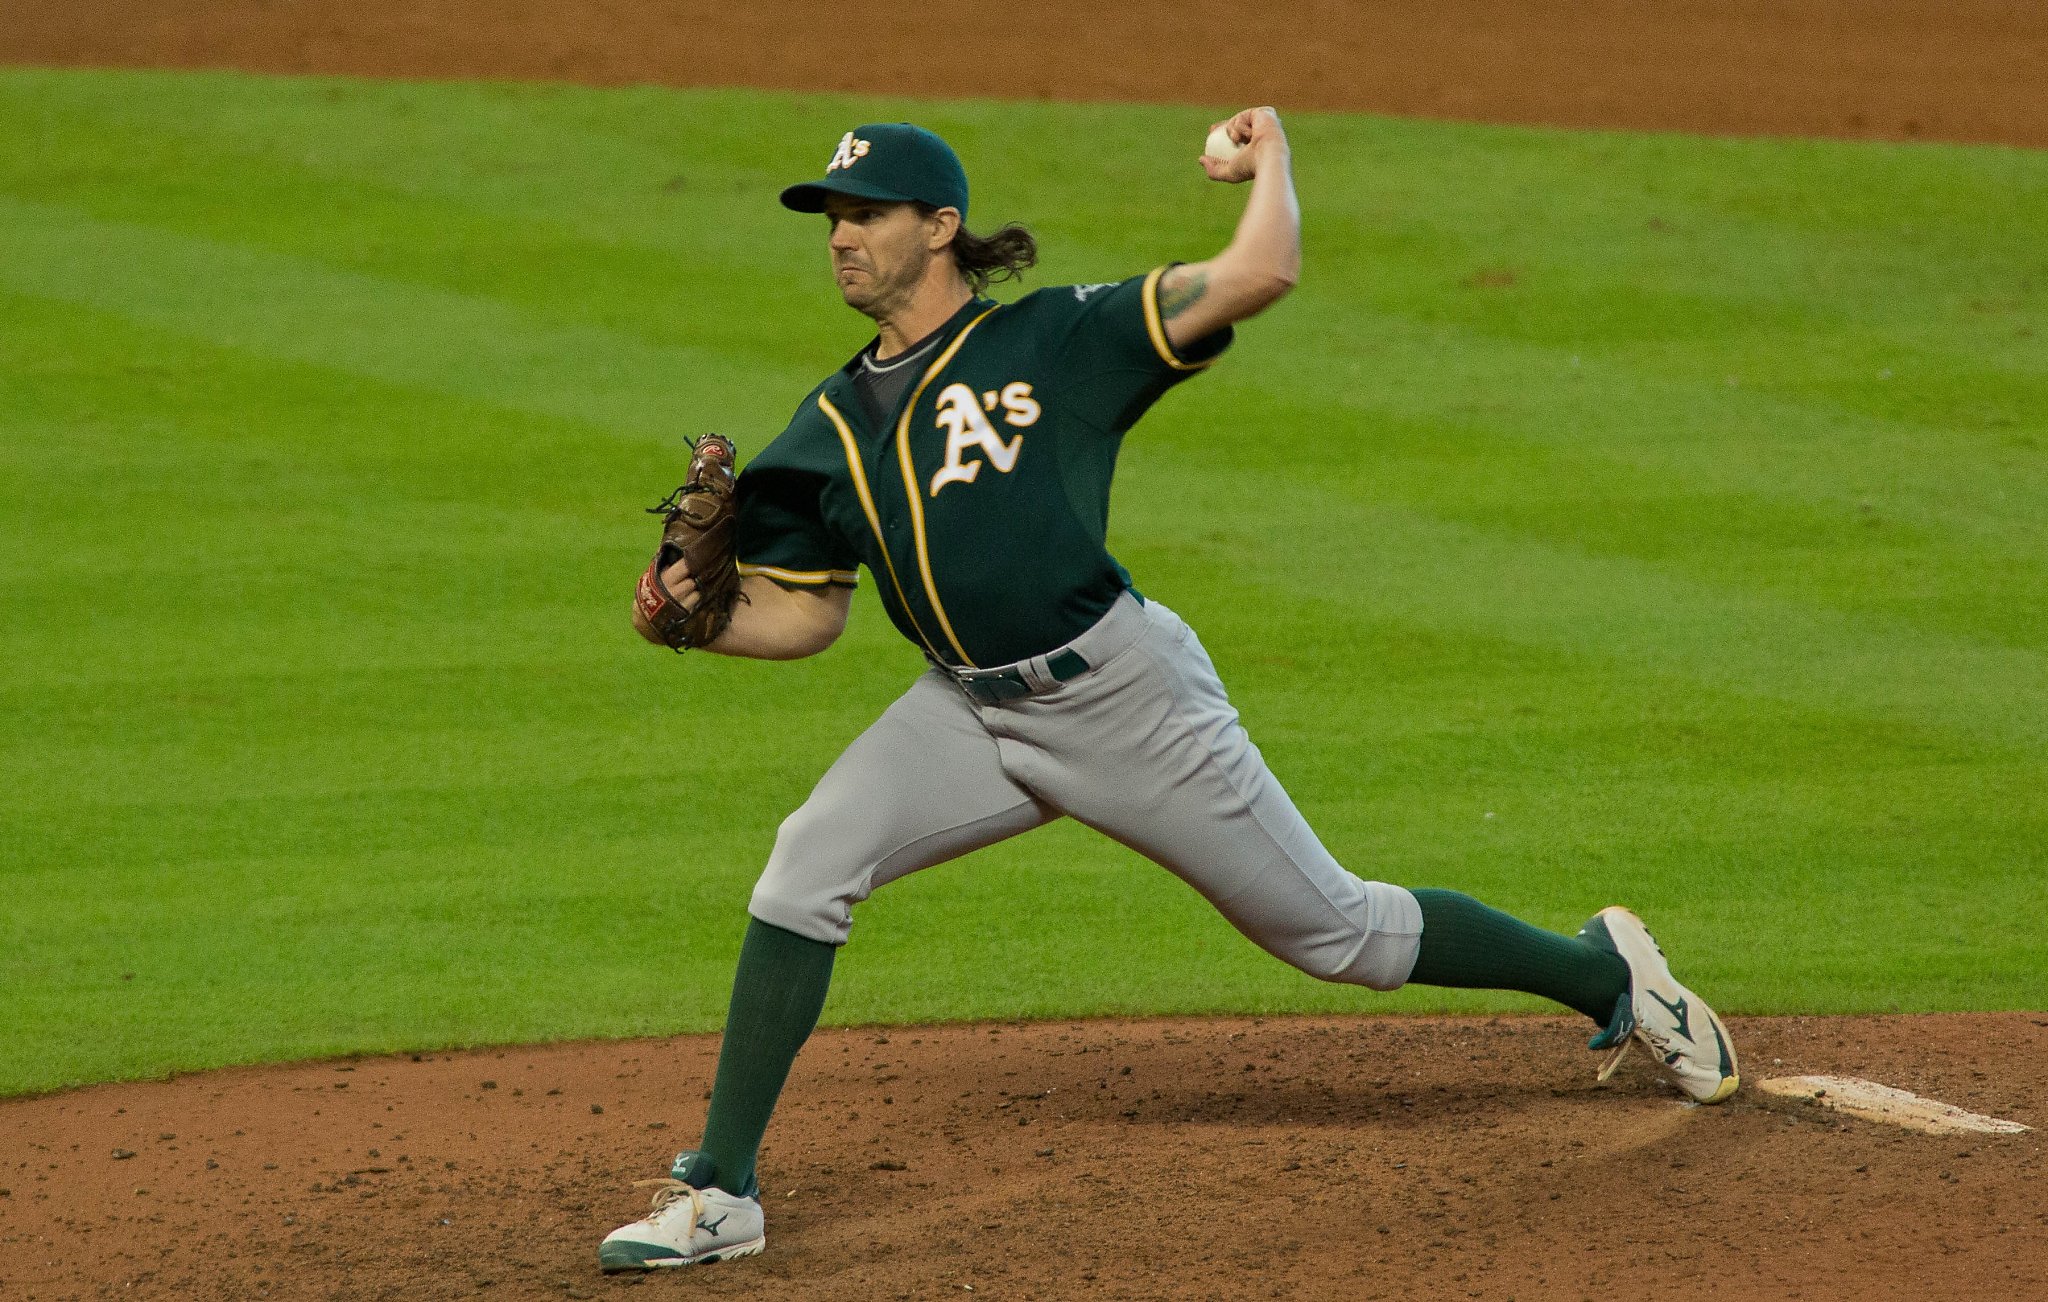 Barry Zito is back on the A's and it's 2002 all over again